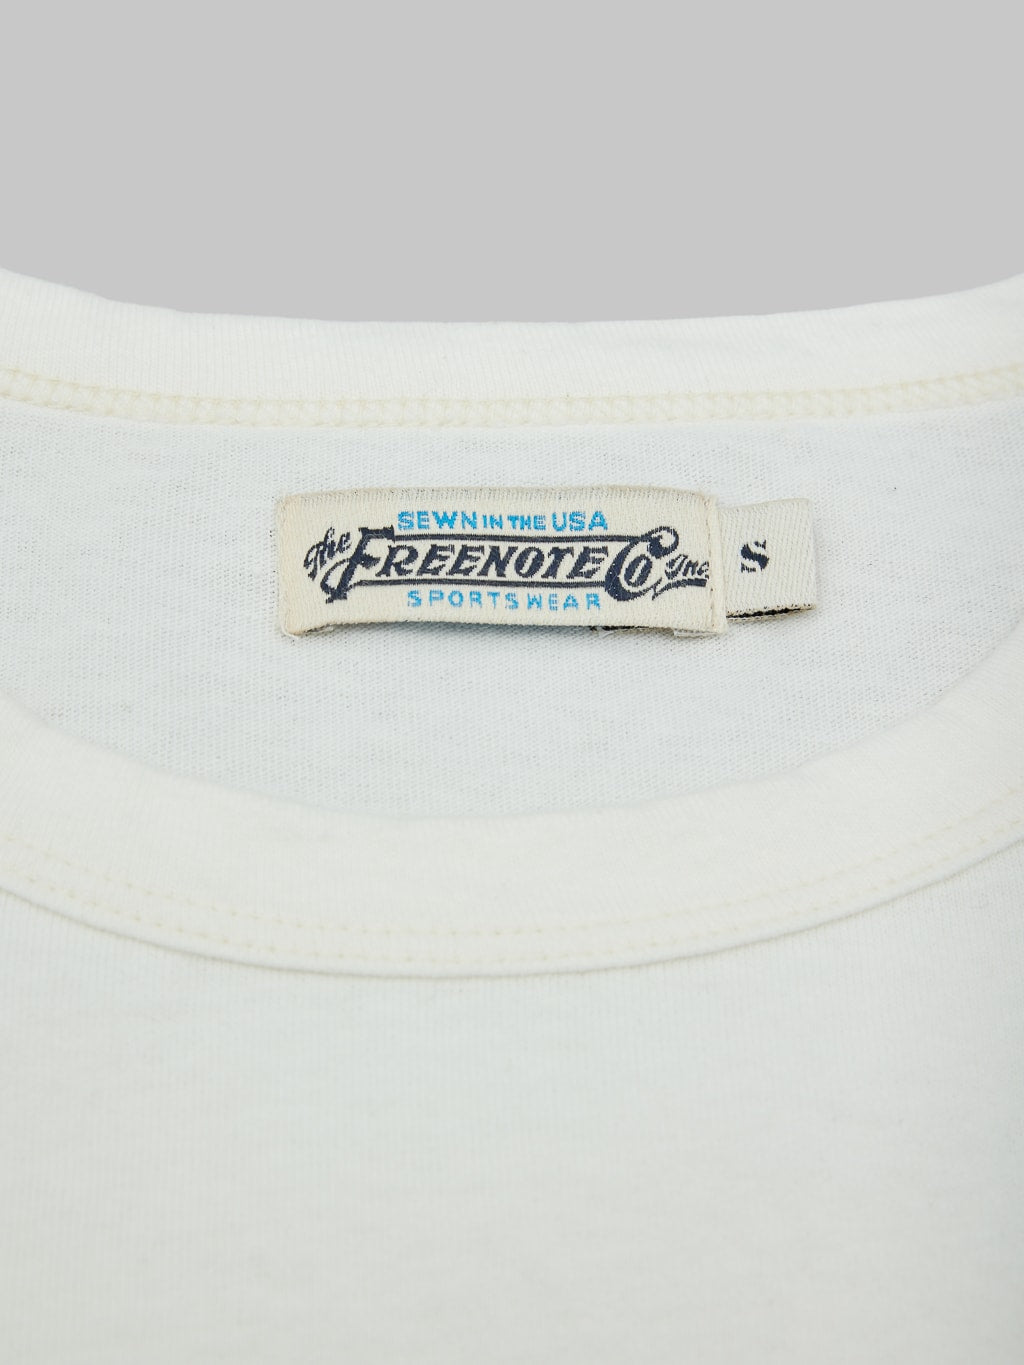 freenote cloth 9 ounce pocket t shirt white size label